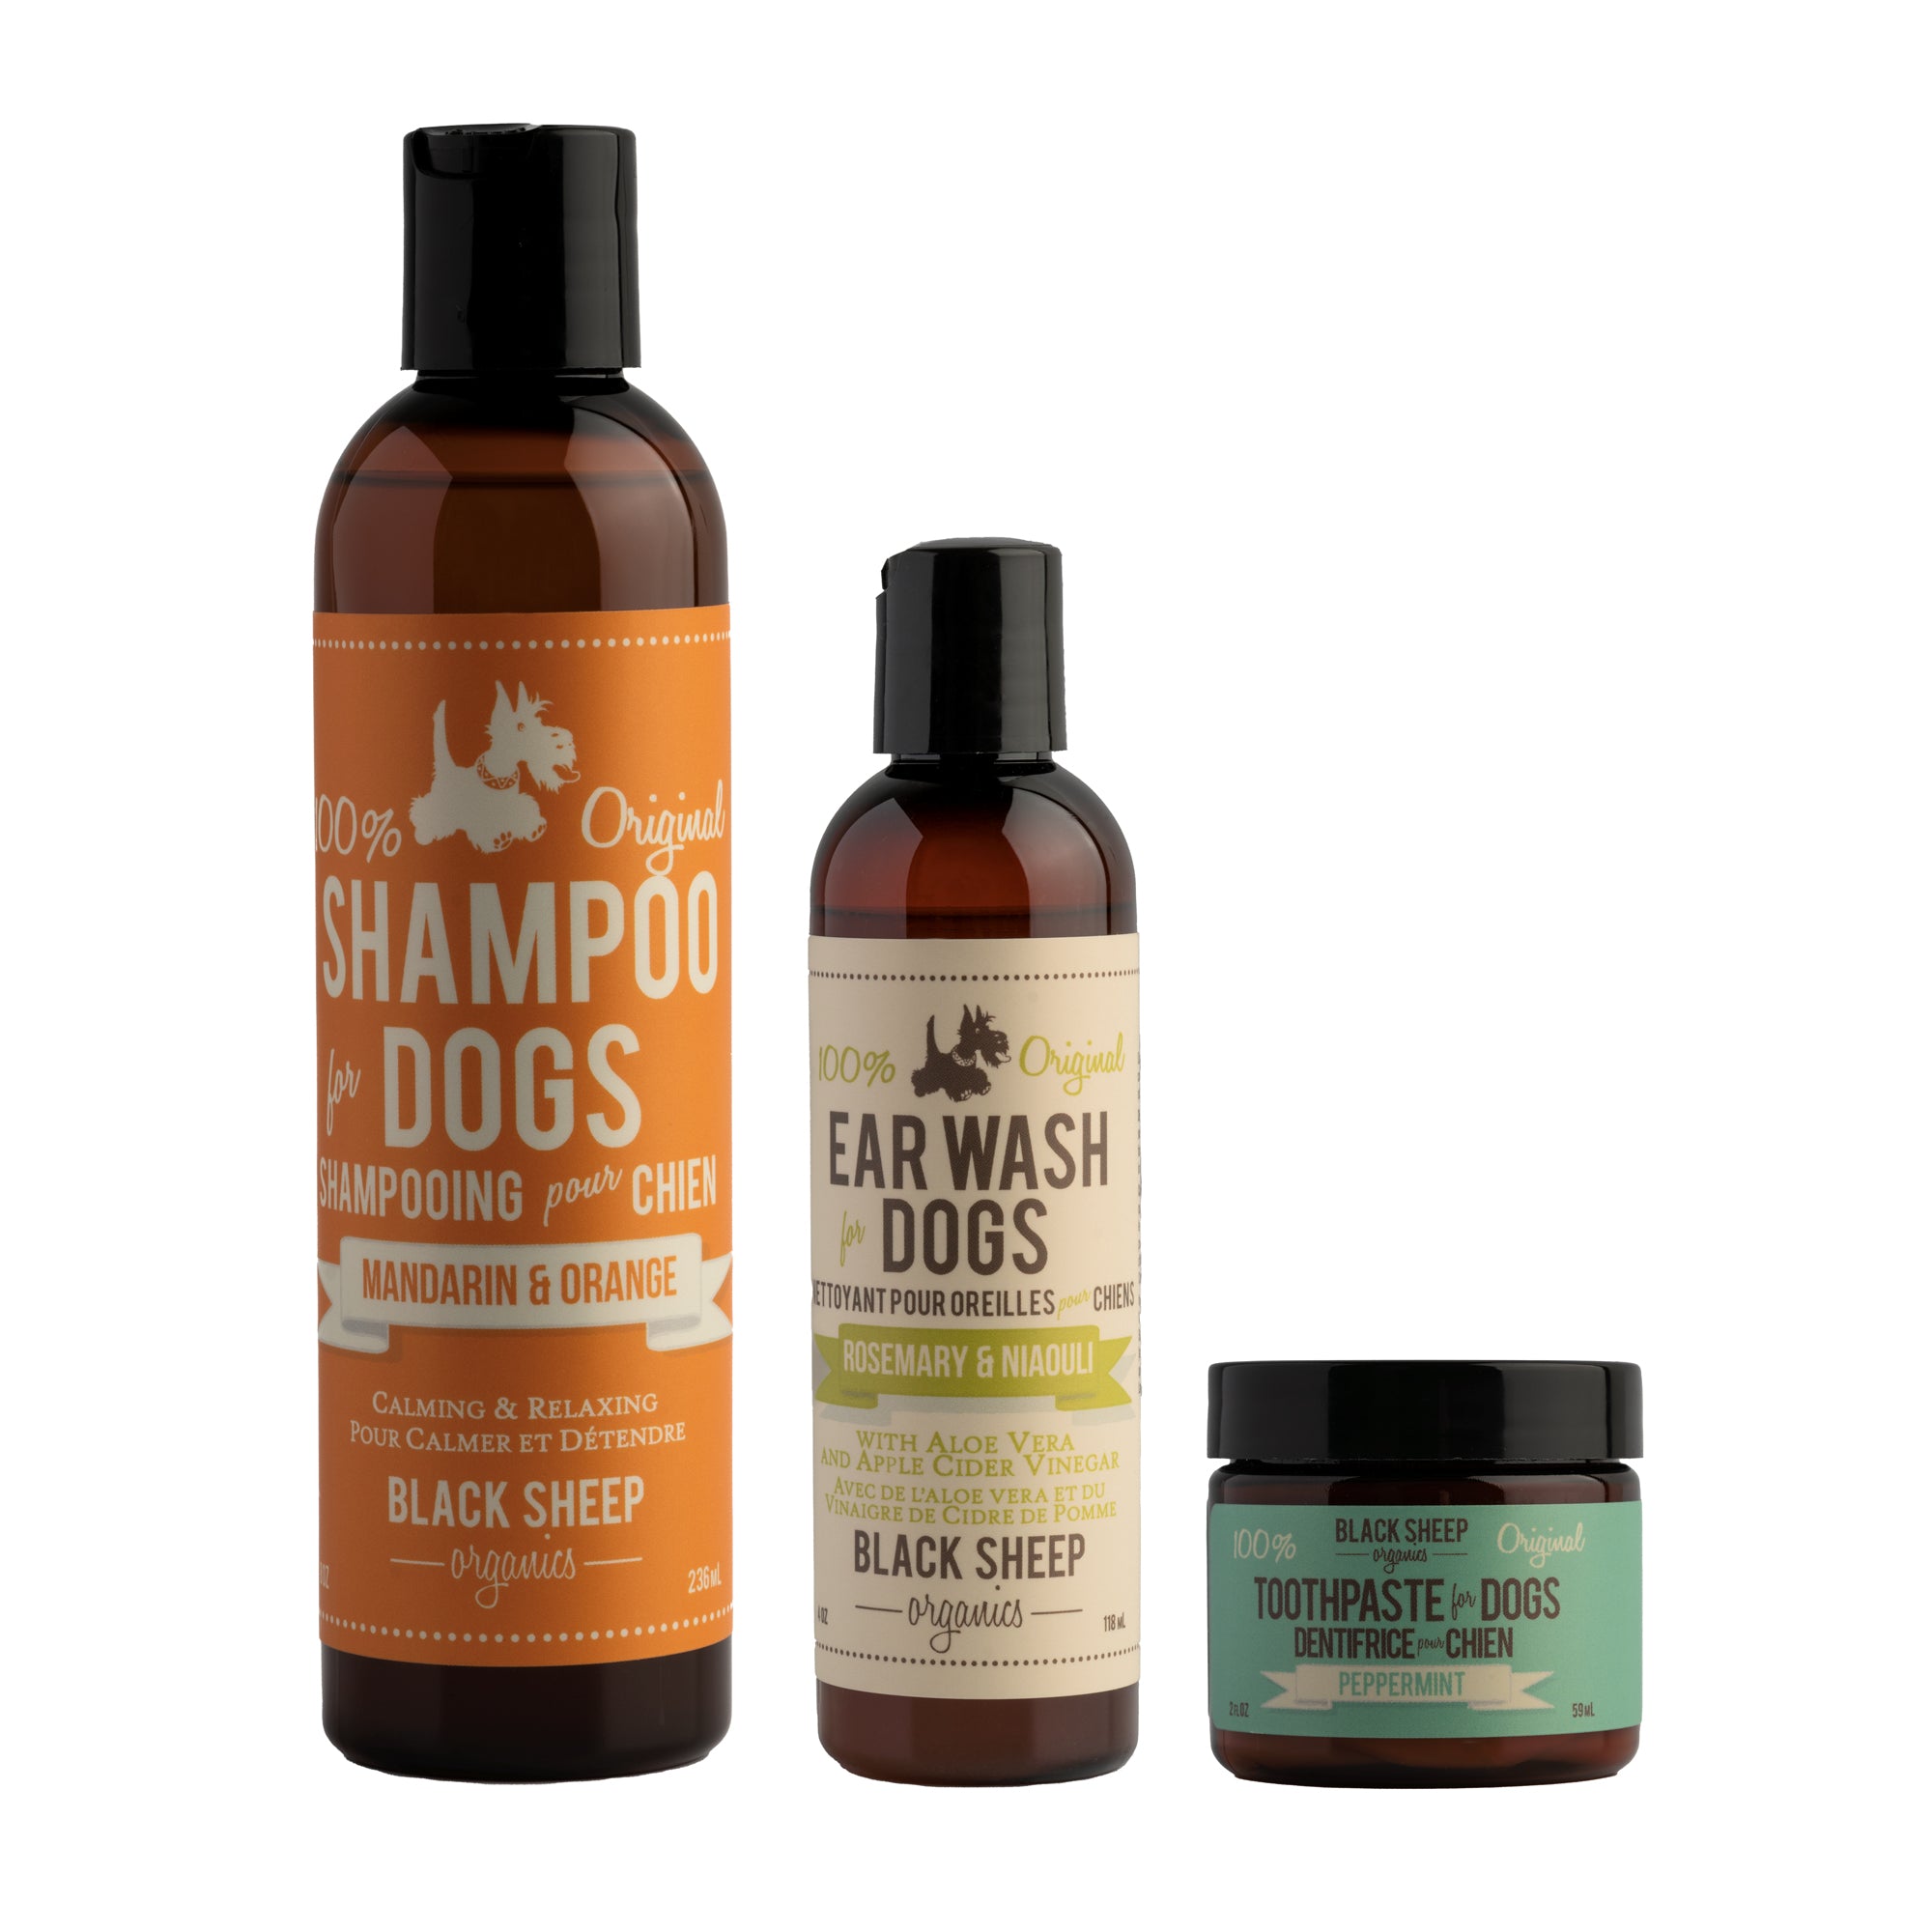 Puppy baths...... could you imagine anything better? Introduce your new puppy to a natural kind of clean. Calming and relaxing Mandarin & Orange Shampoo is grouped here with wonderfully gentle Ear Wash and minty fresh Toothpaste.